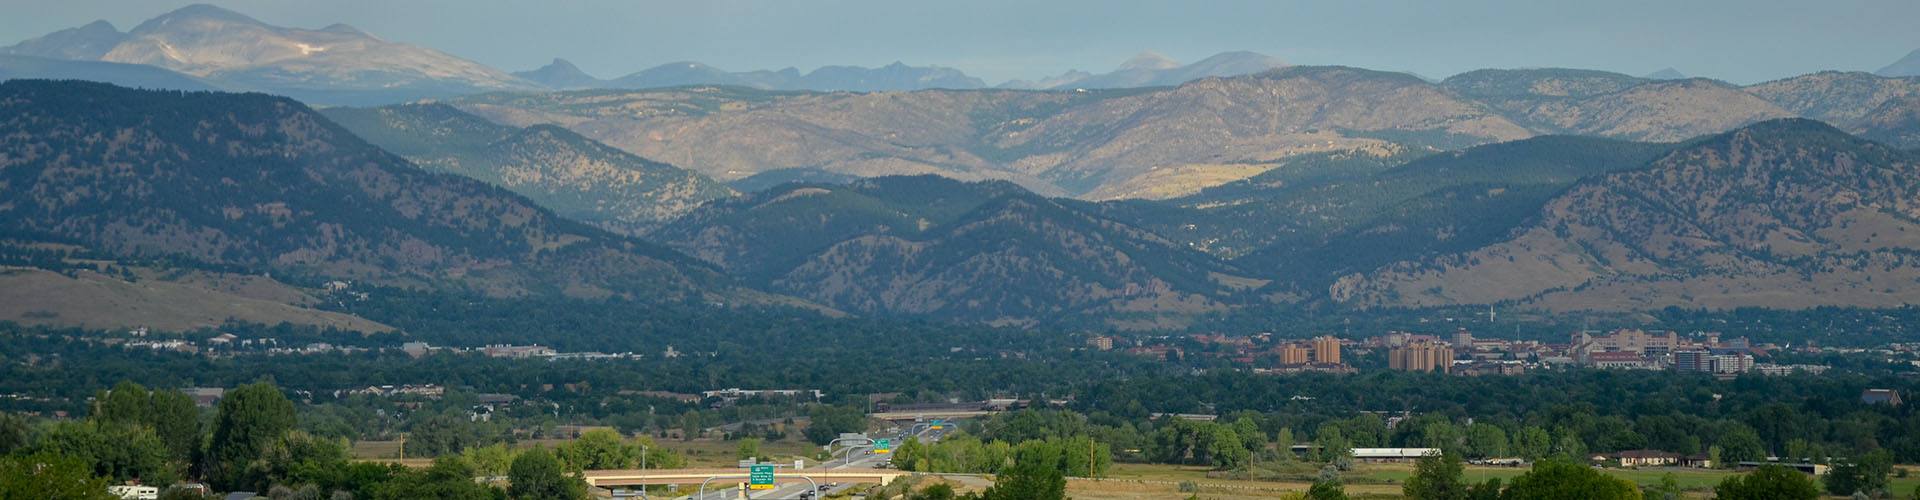 Panoramic landscape of Boulder County from US 36 at Davidson Mesa Scenic Overlook